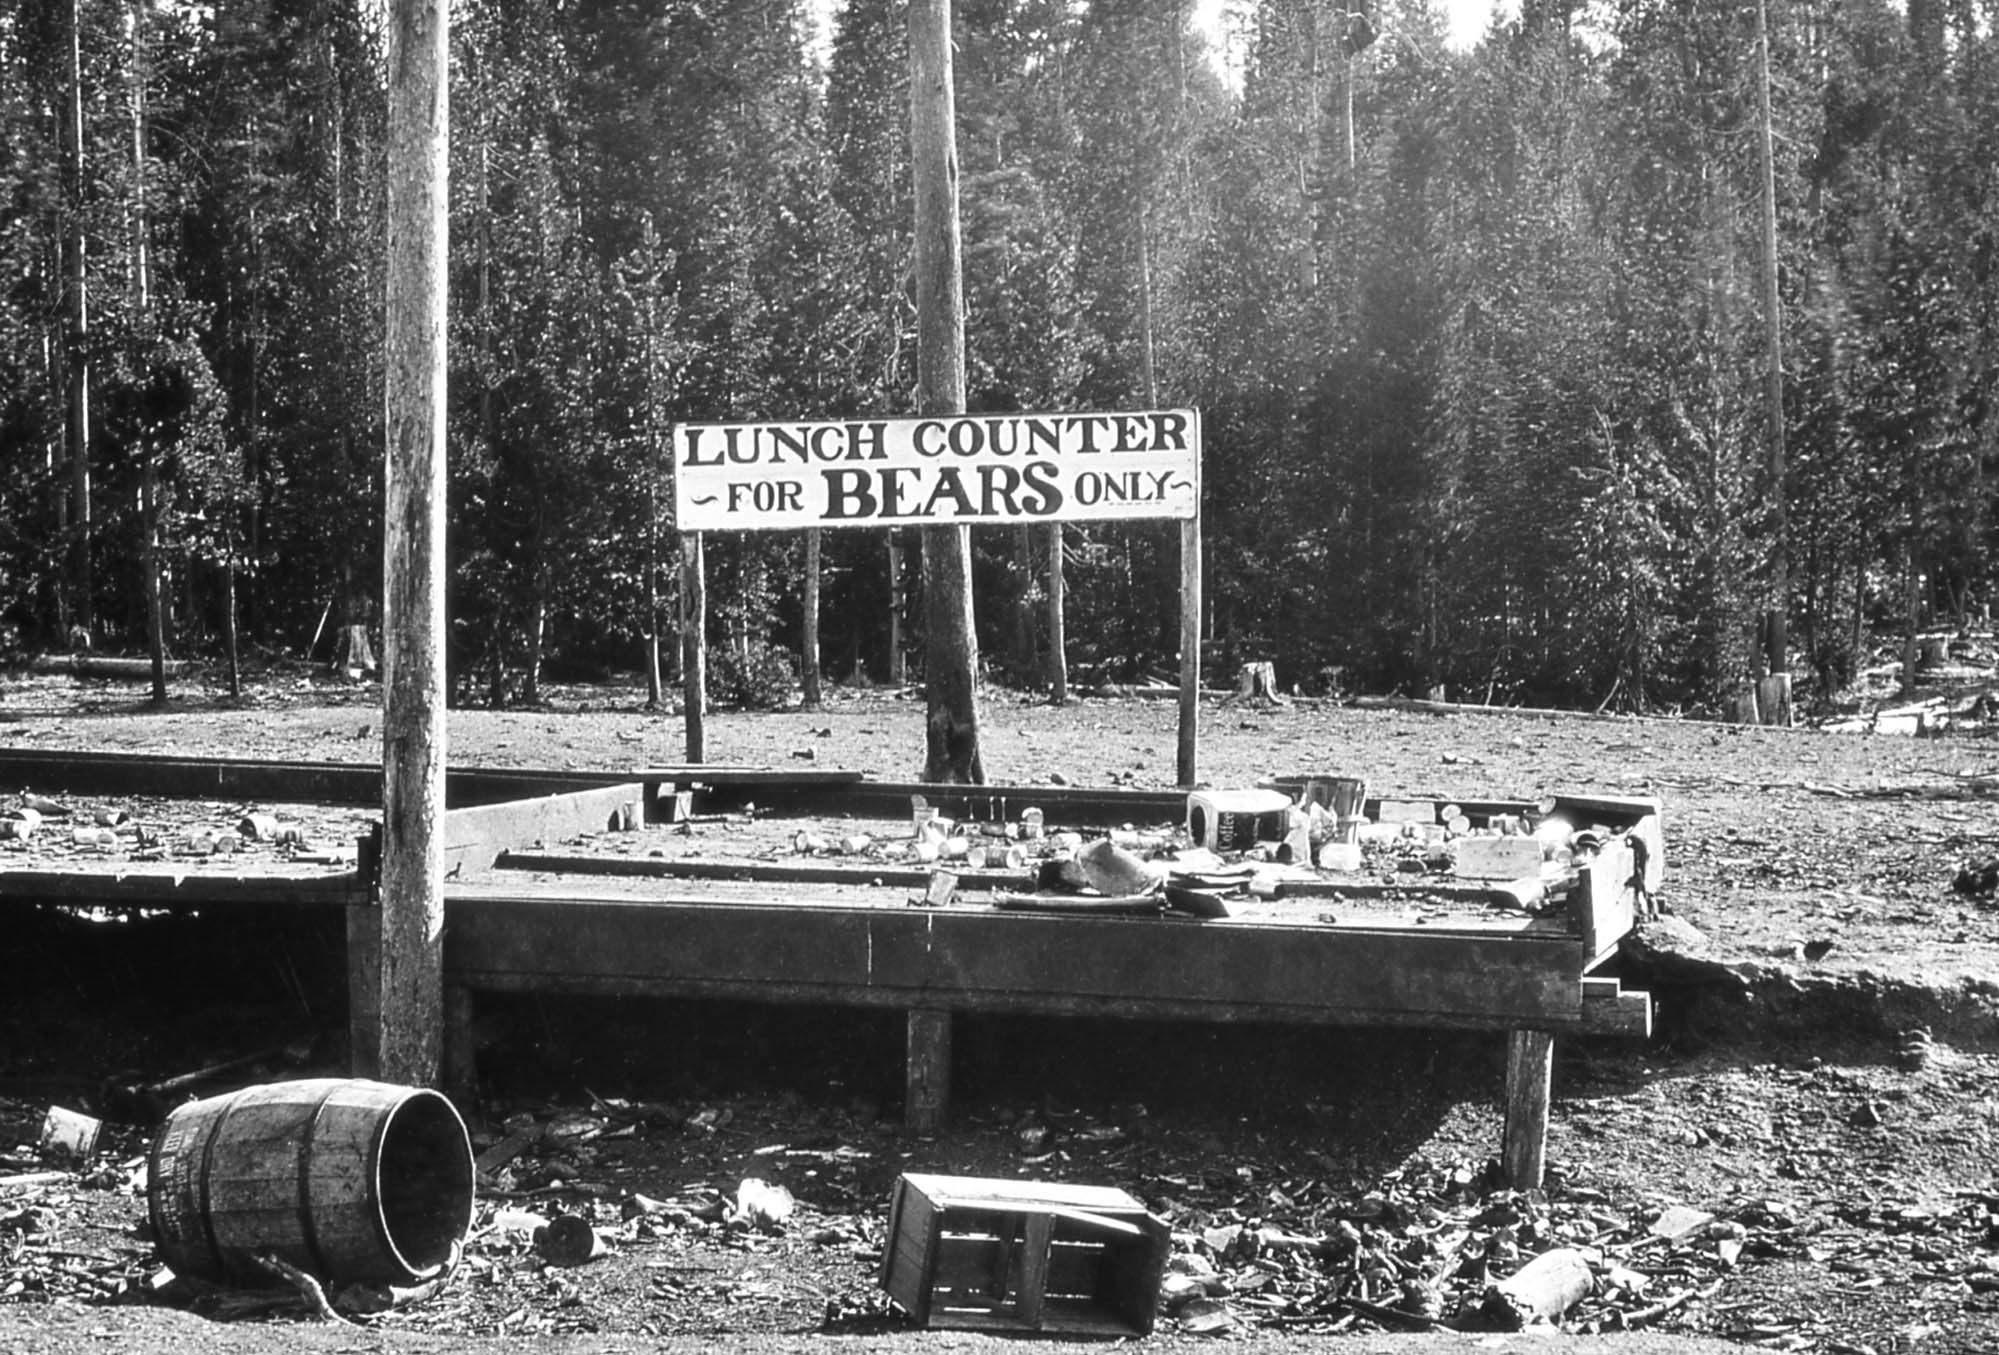 A platform with garbage on it and a sign that says, "Lunch counter- for bears only-".